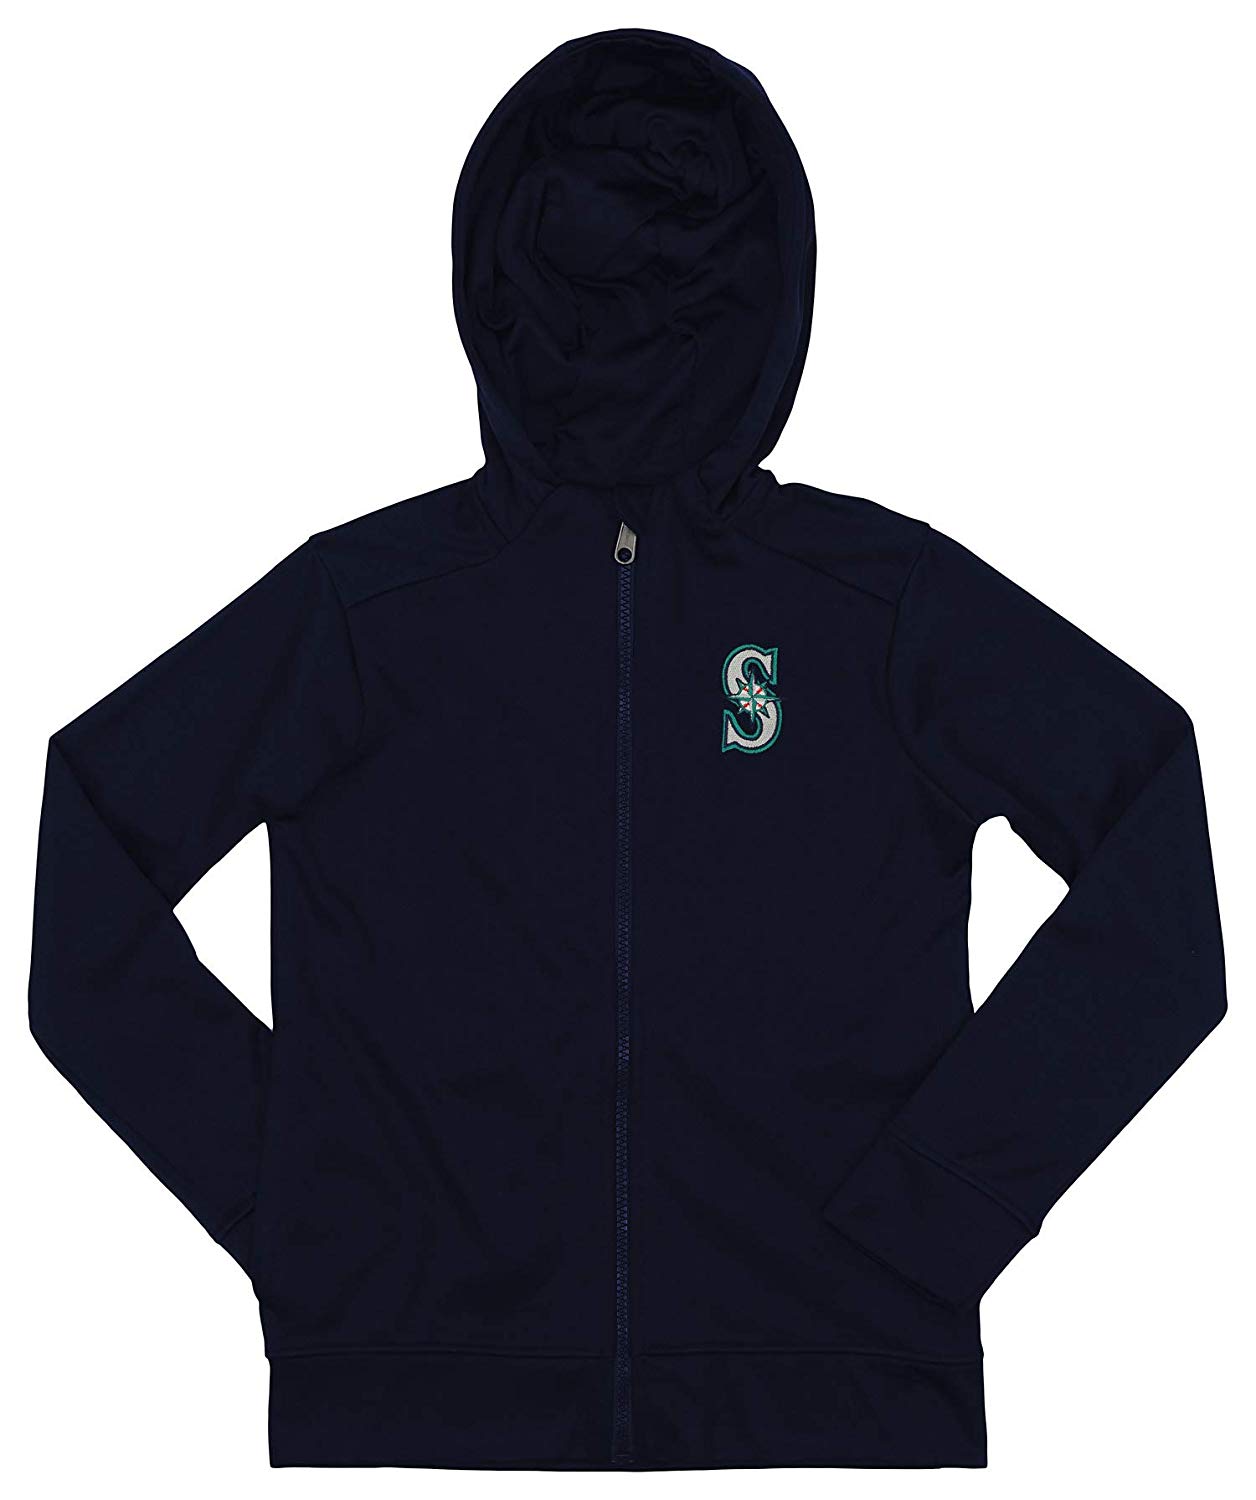 Outerstuff MLB Youth/Kids Seattle Mariners Performance Full Zip Hoodie ...